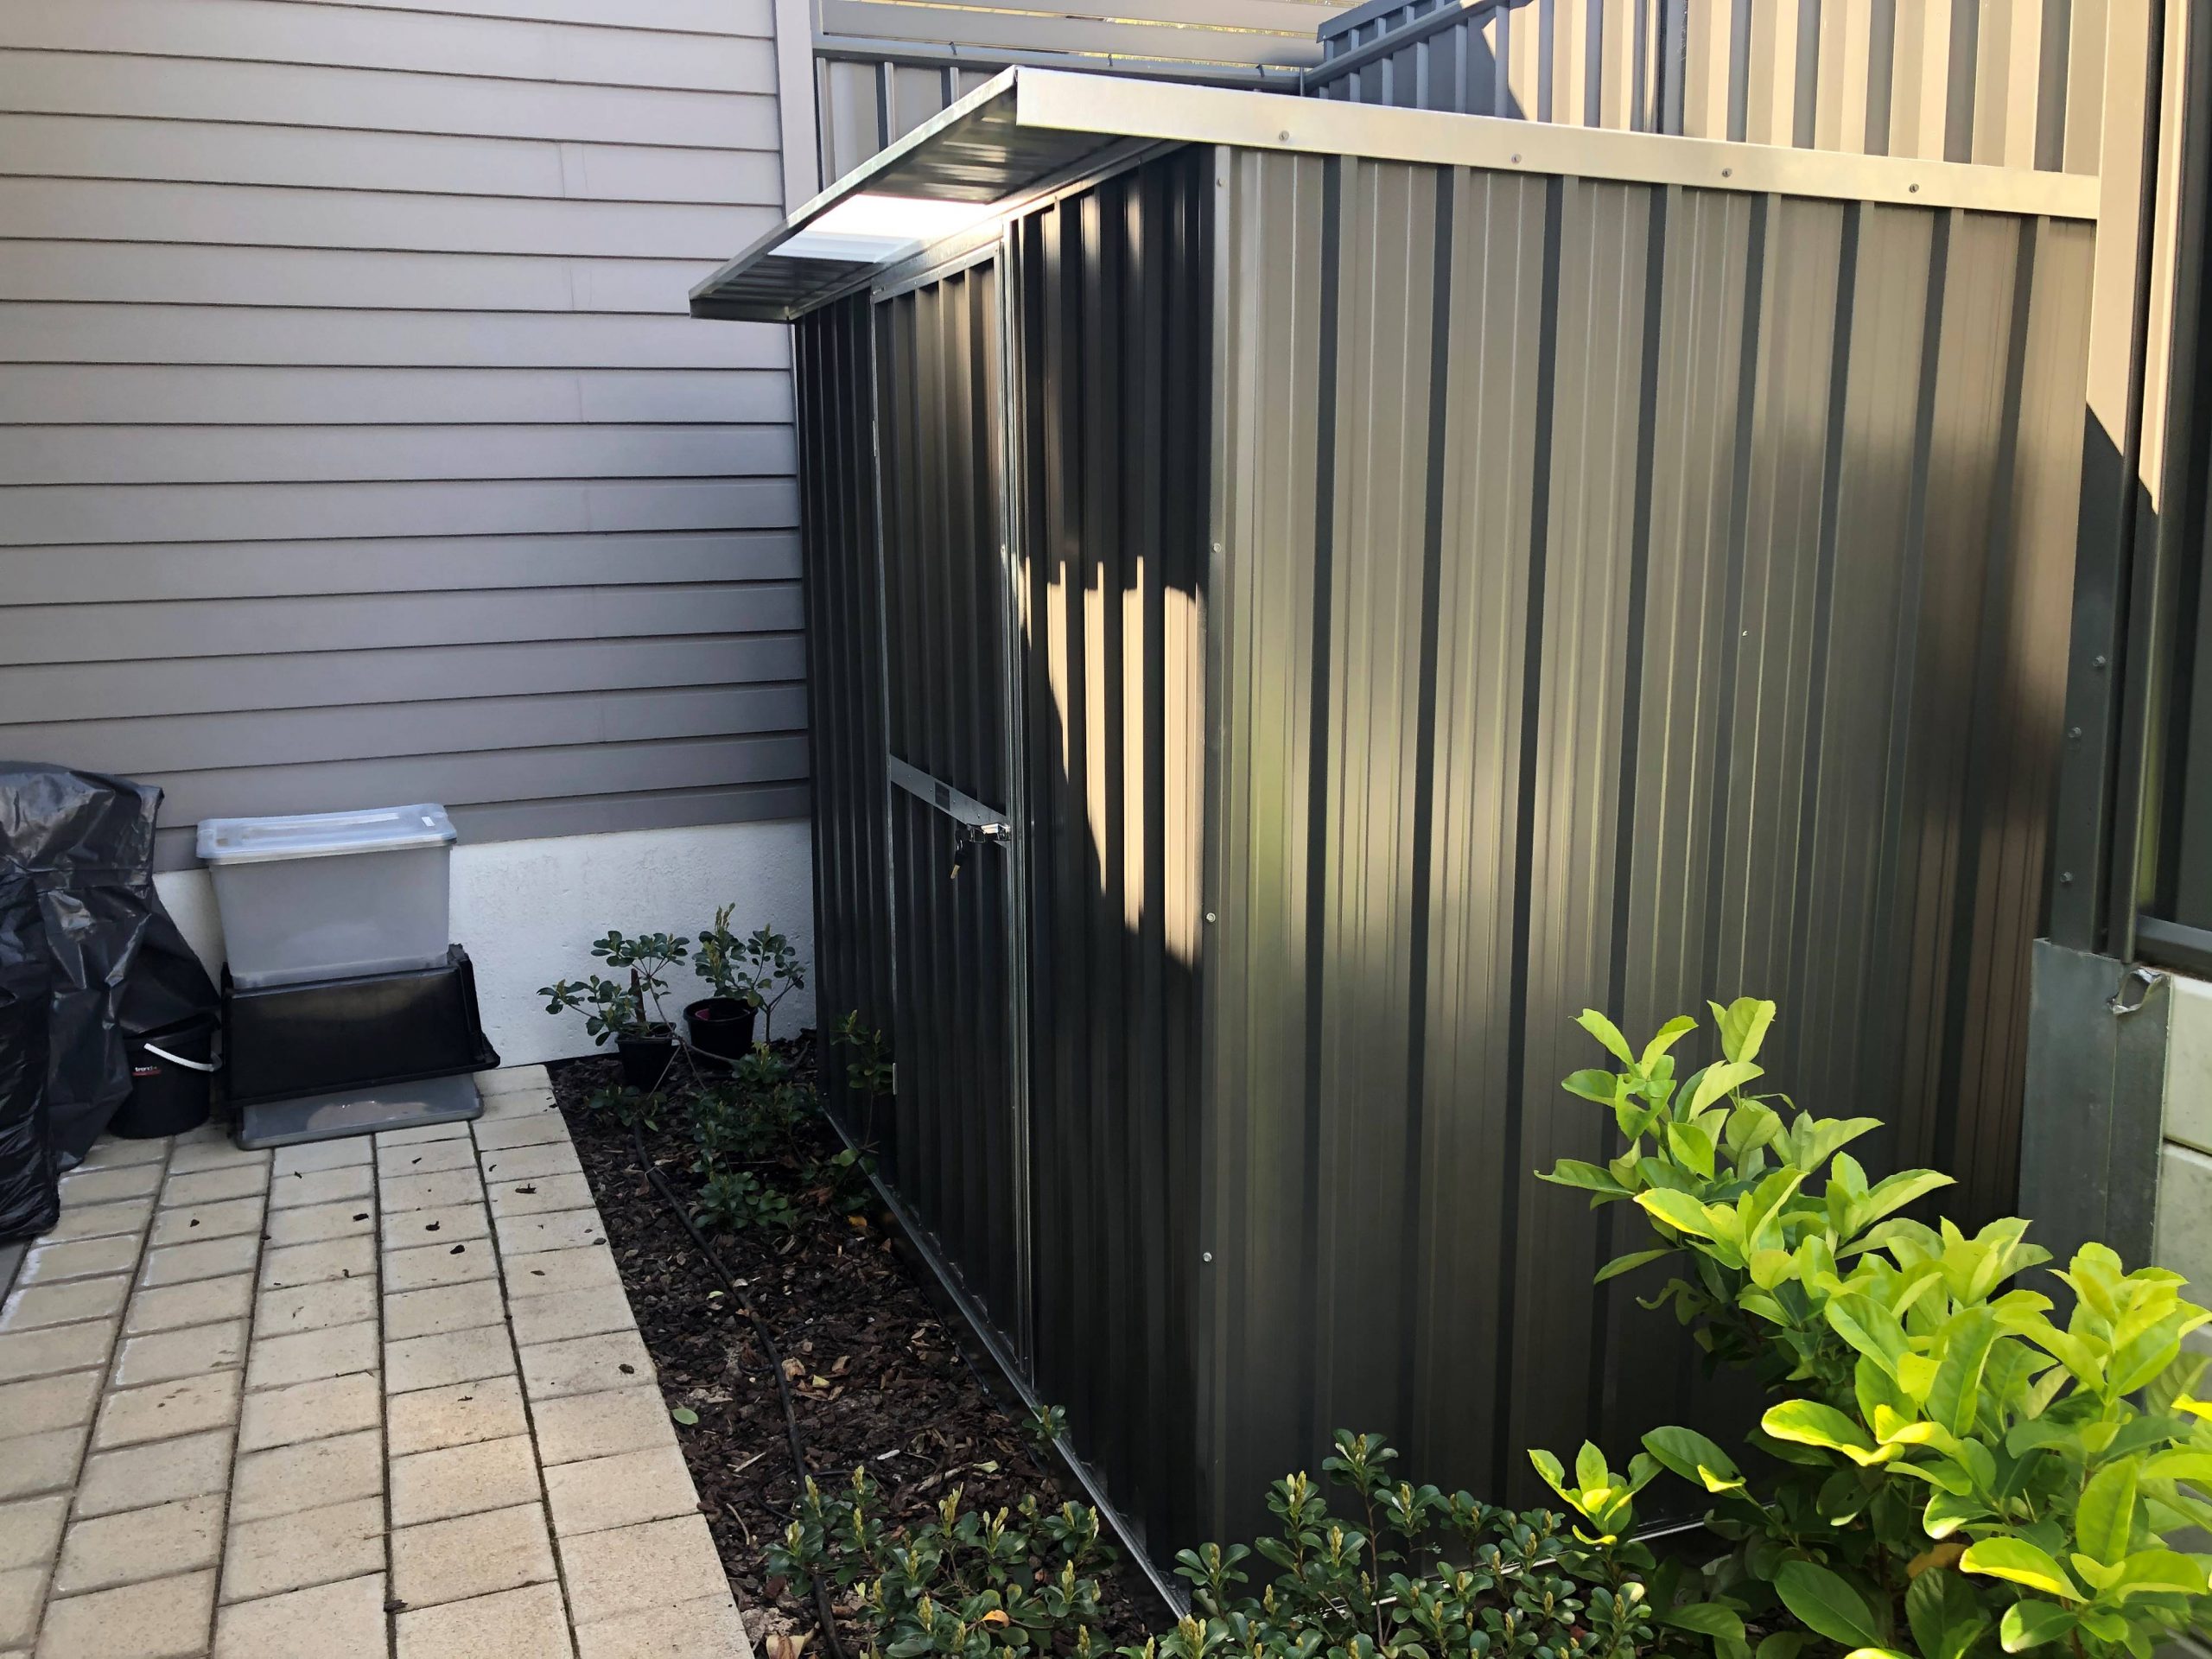 Image of a Garden Sheds in a backyard